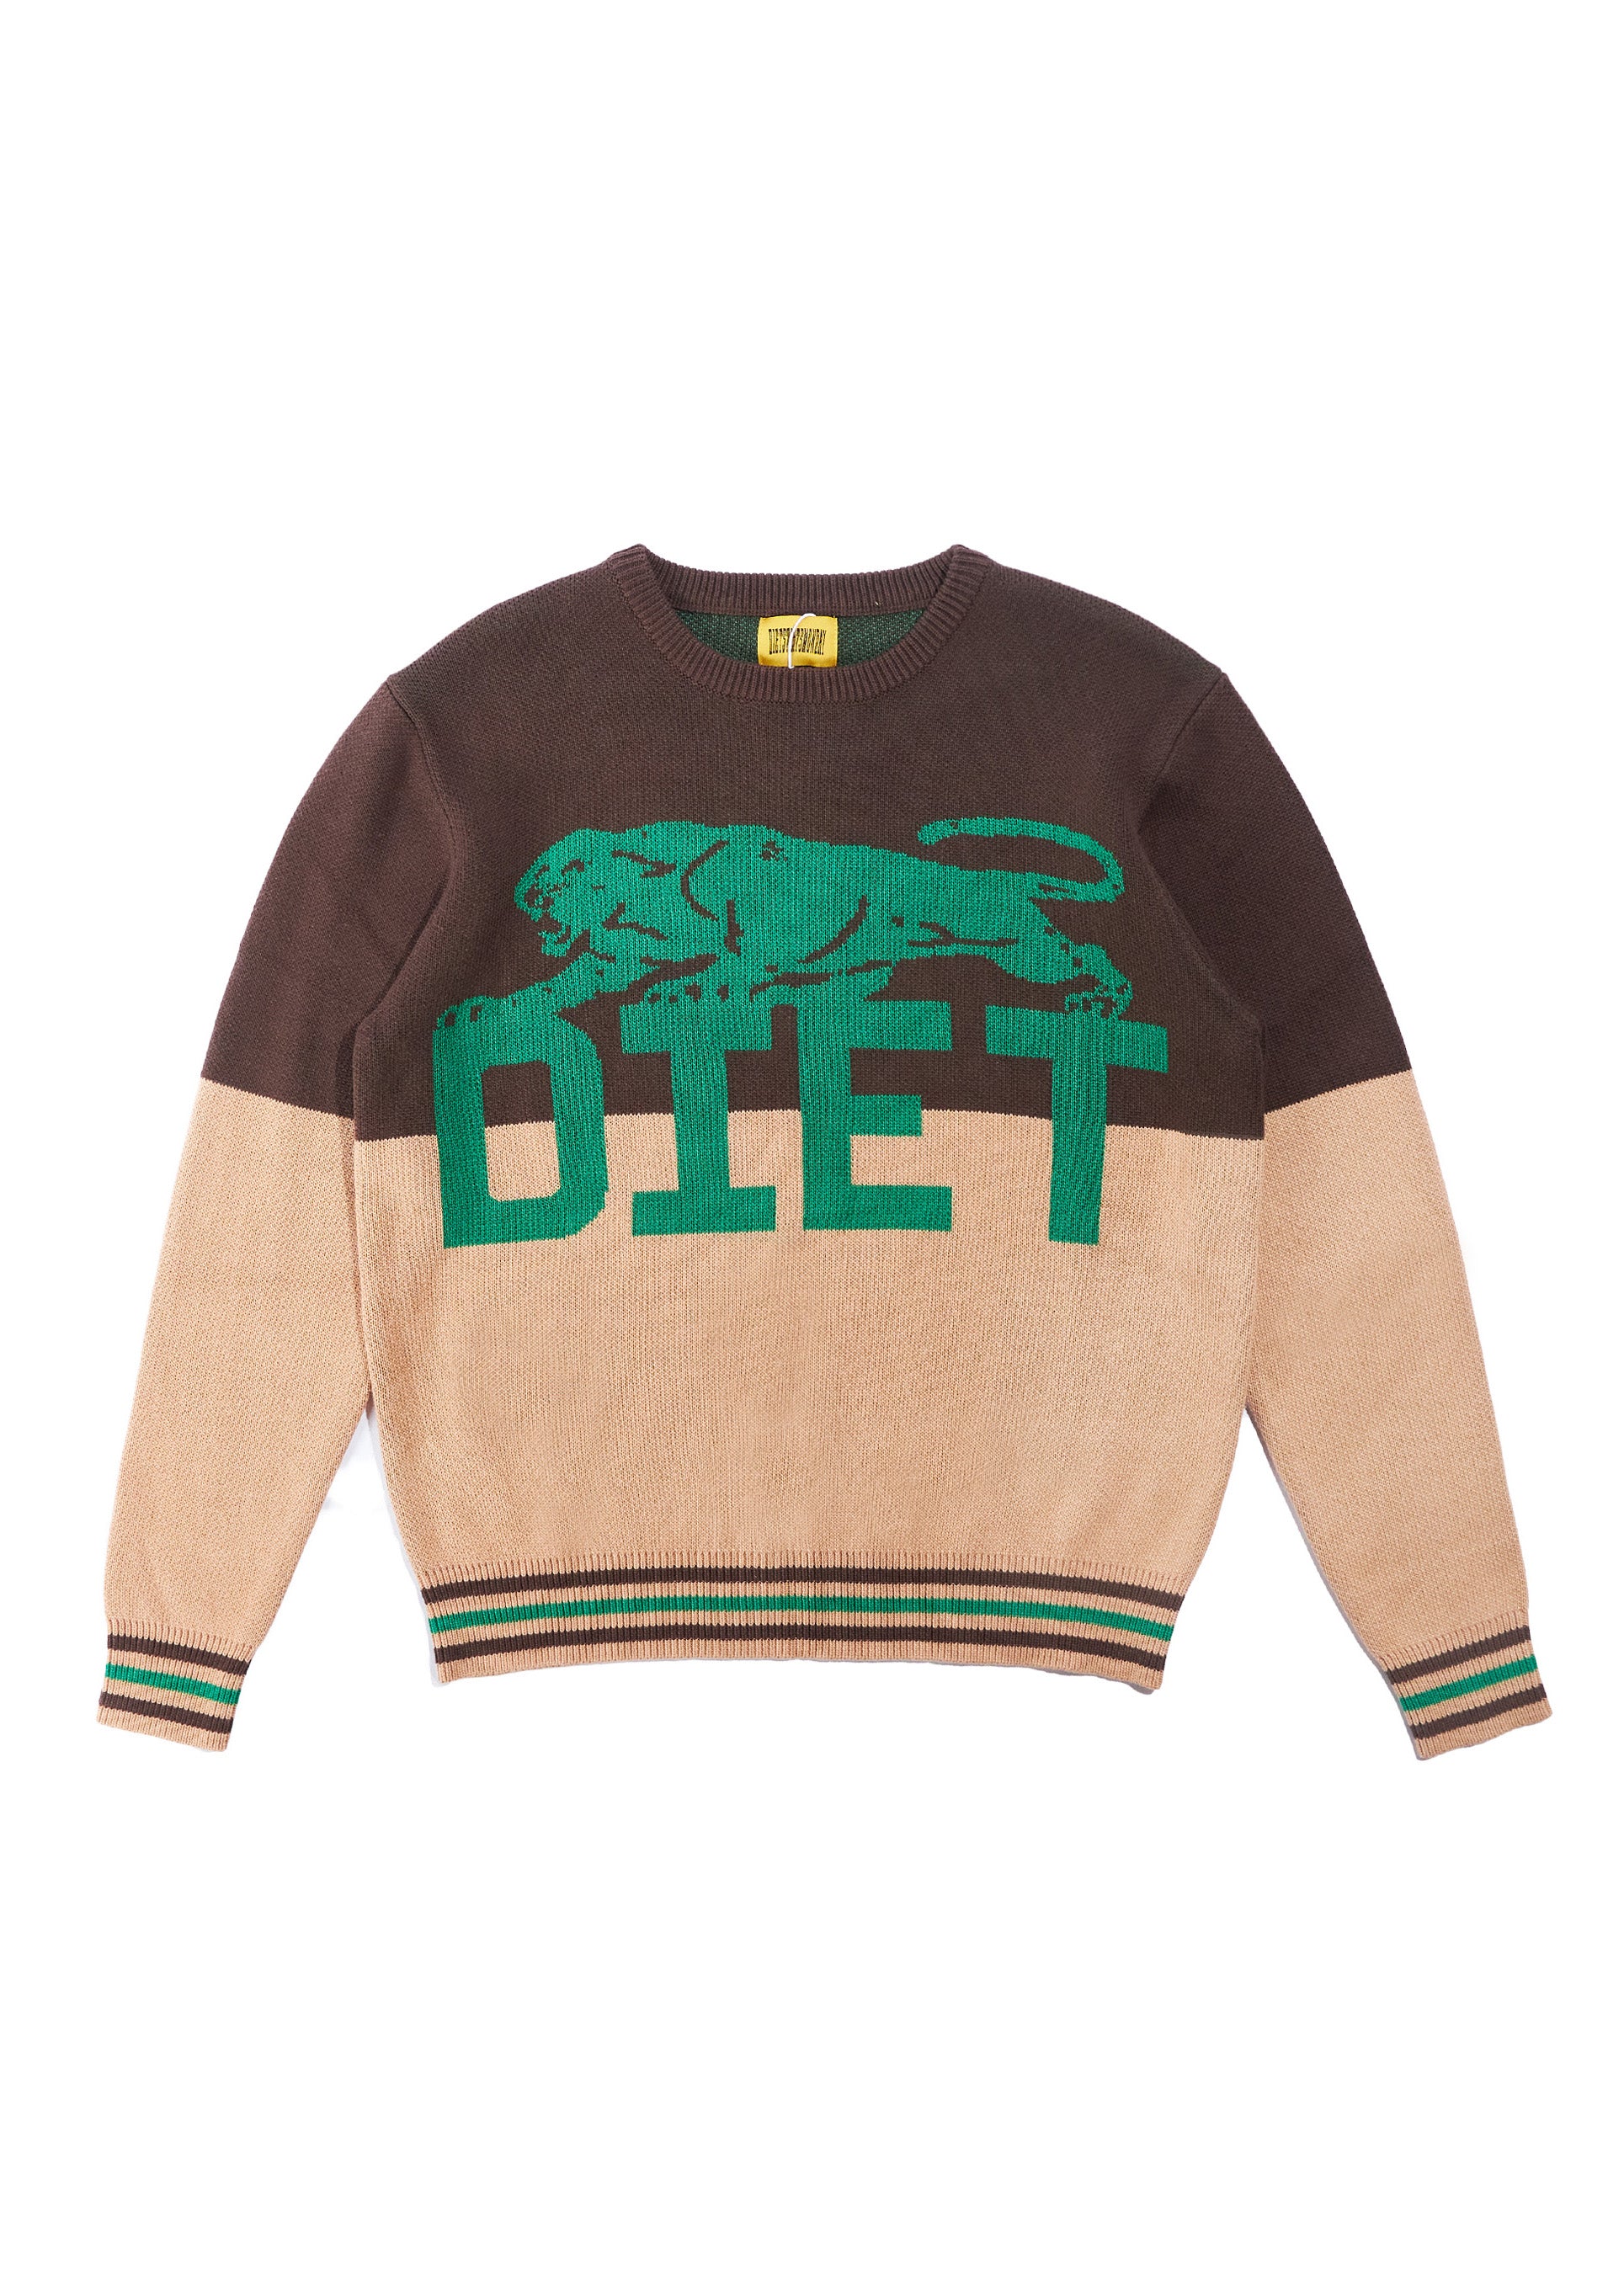 Panther Knit Sweater - Brown